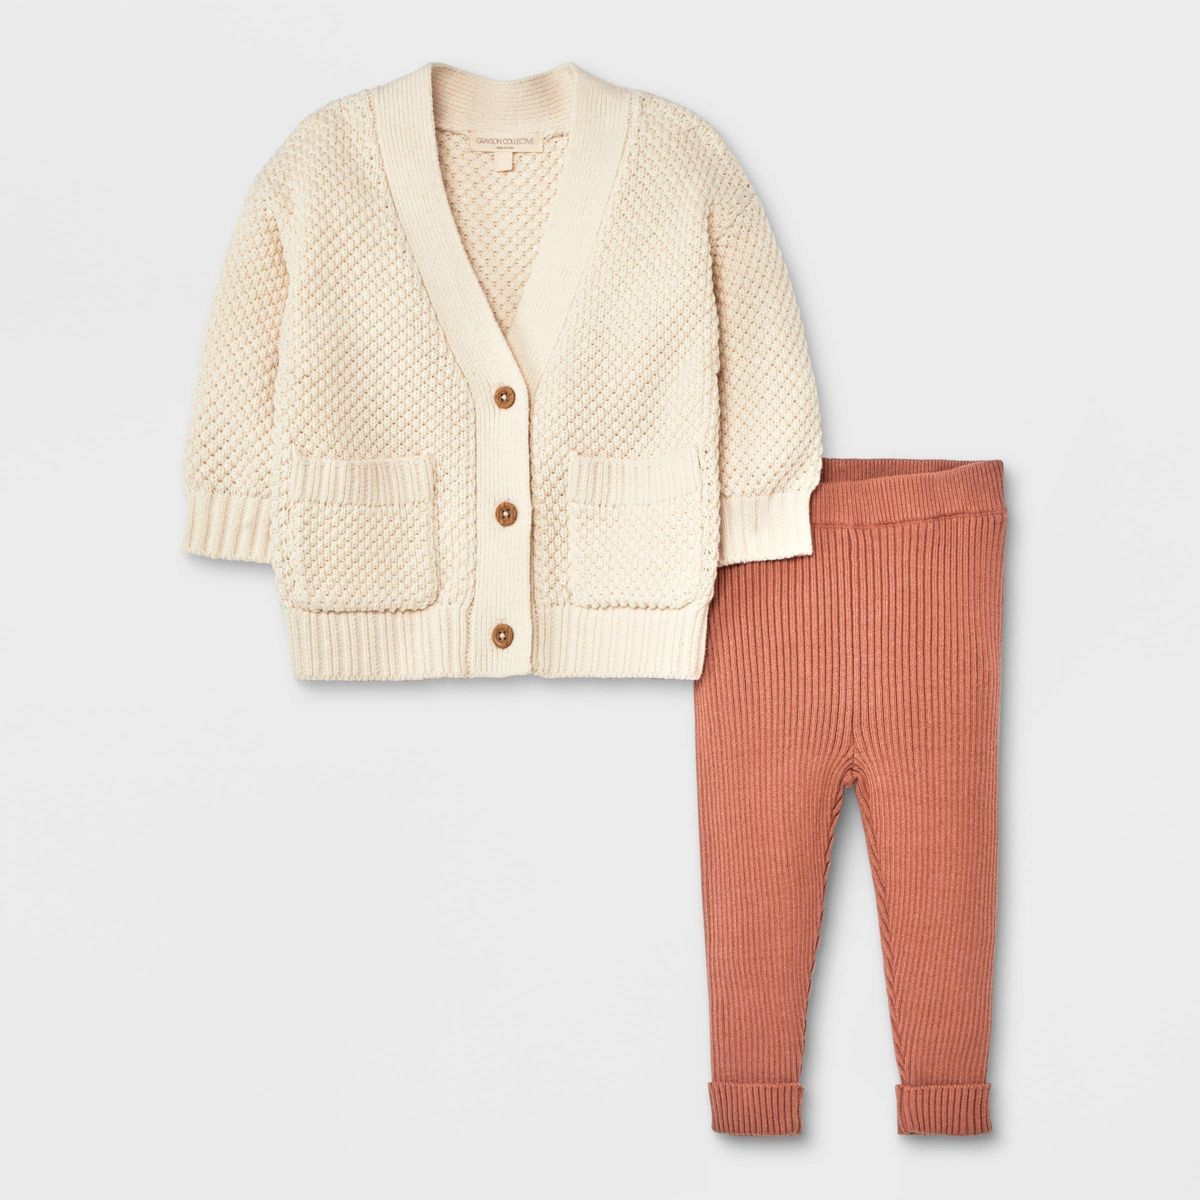 Grayson Collective Baby Cardigan & Ribbed Leggings Set - Cream/Brown | Target